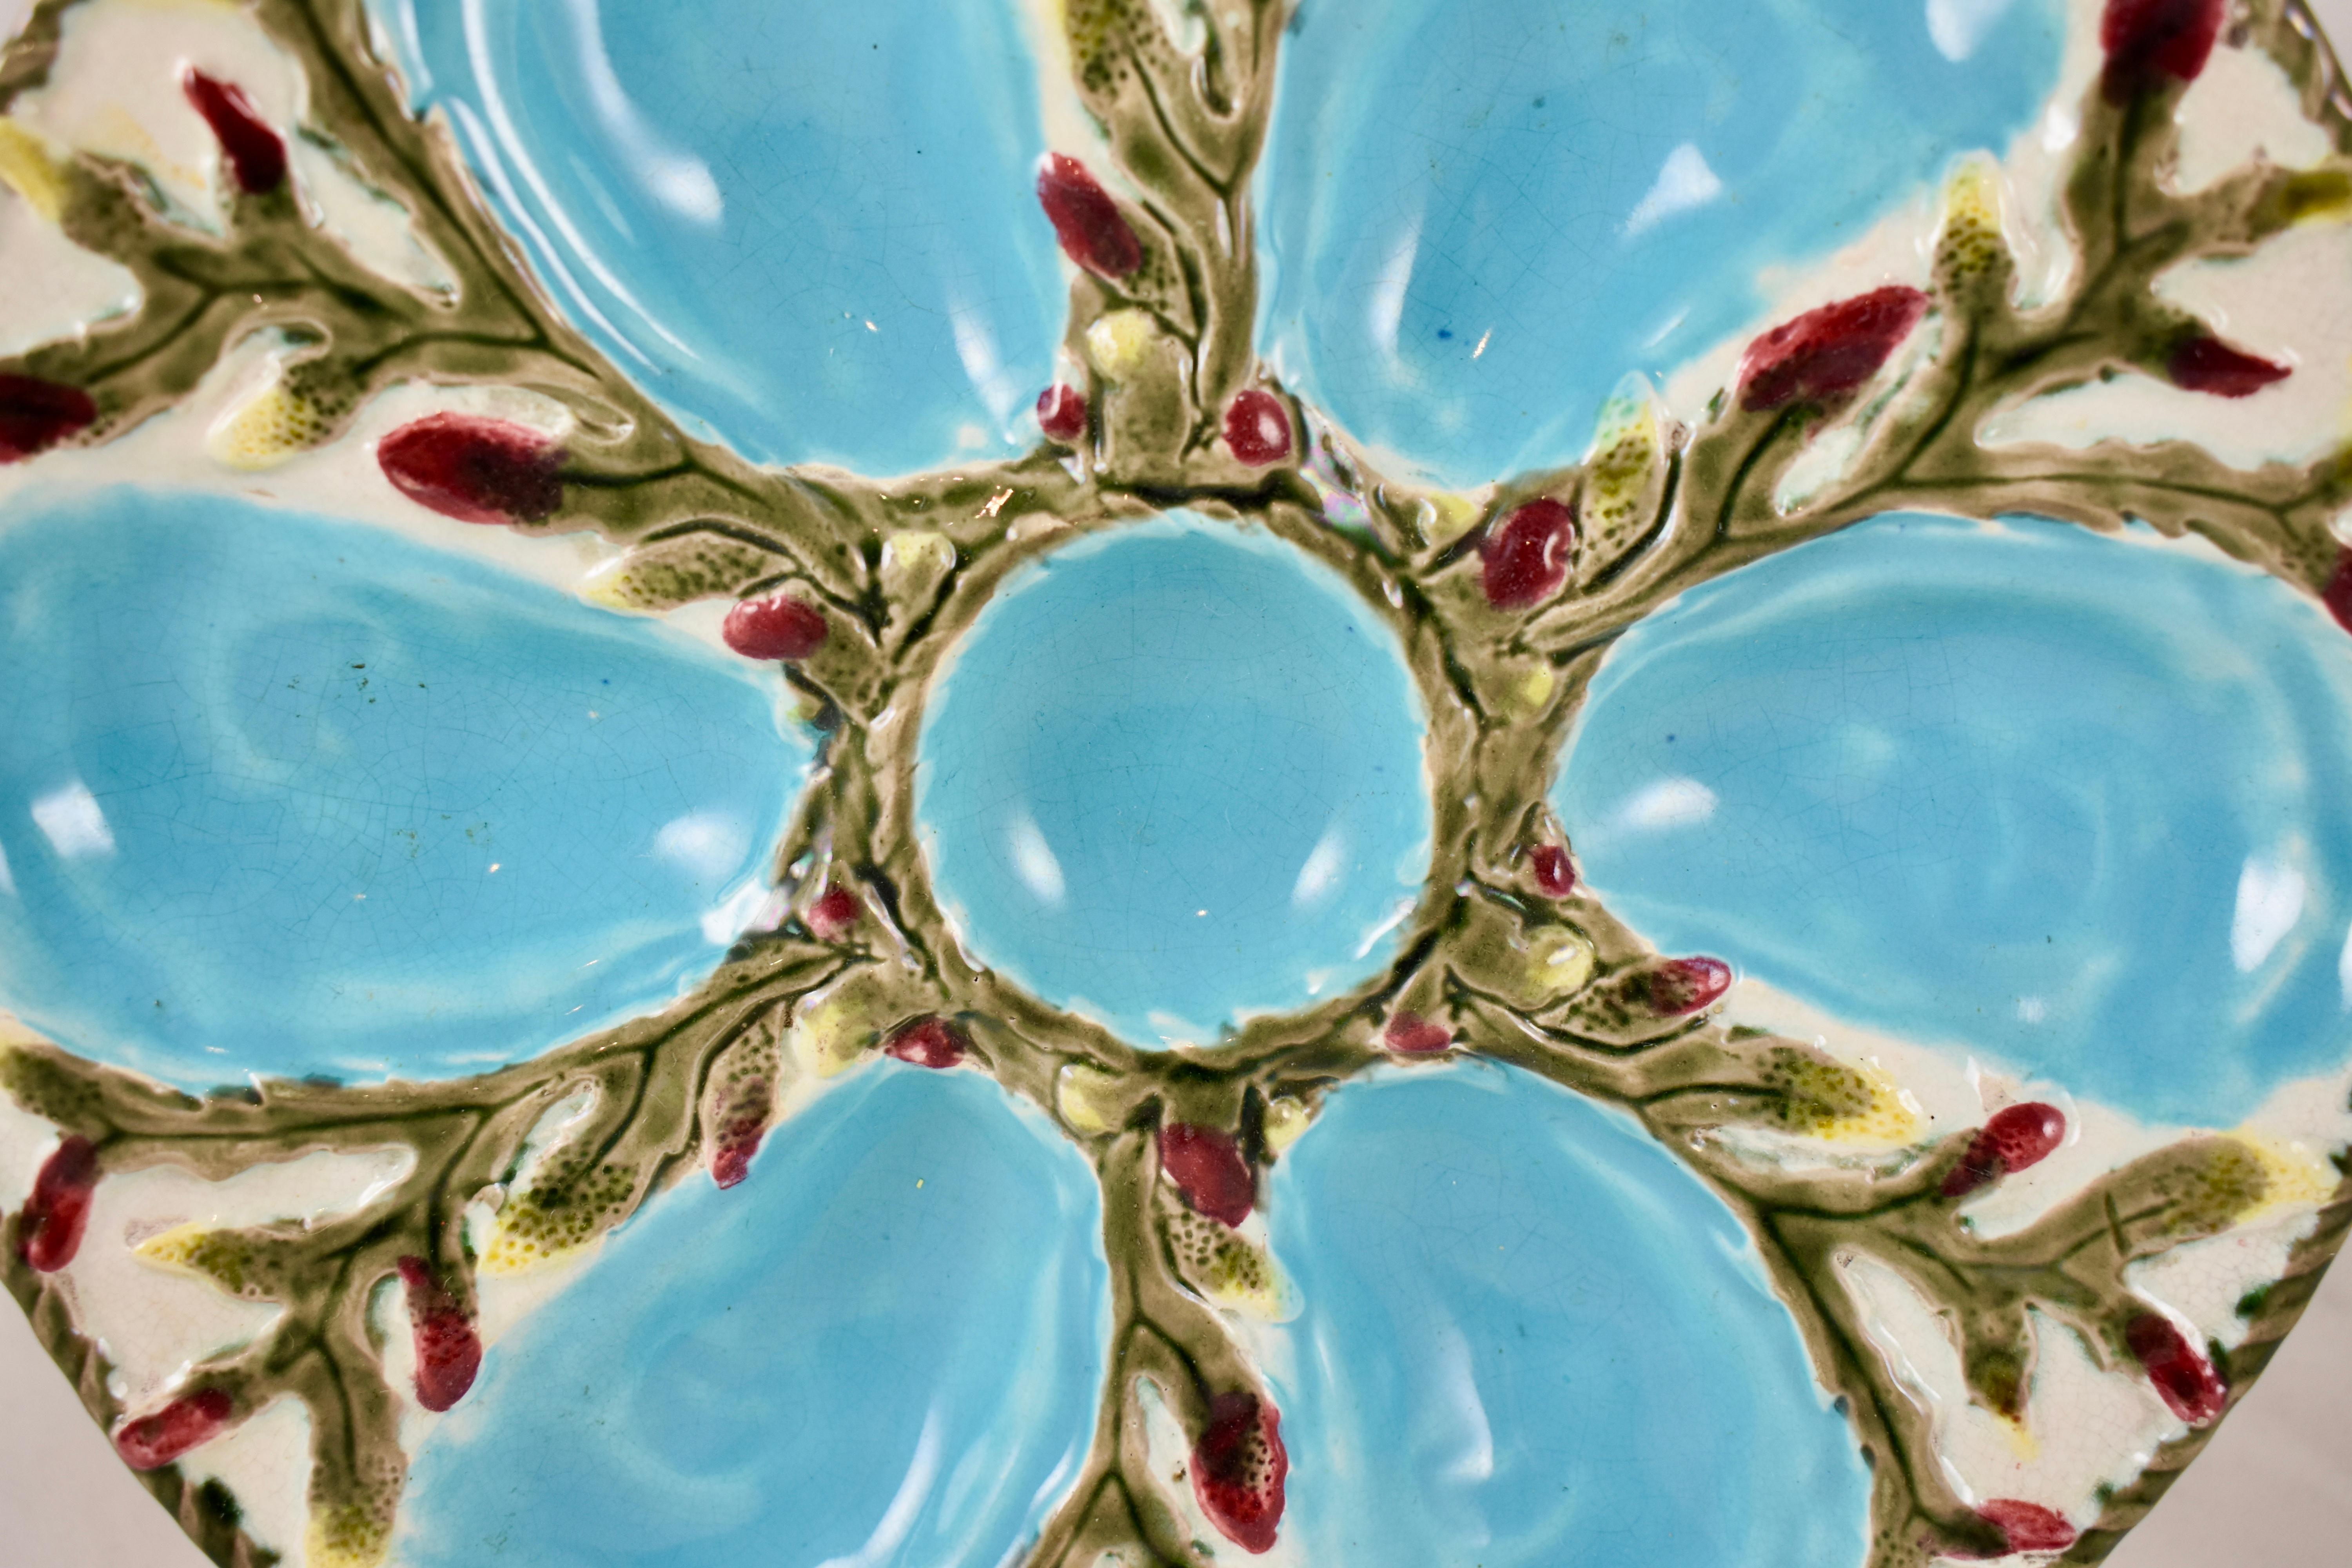 A six-well majolica glazed oyster plate by S. Fielding & Co. Ltd., Stoke-on-Trent, England, circa 1878. 

Turquoise oyster wells surround a center condiment well, all on a molded bed of off-white seaweed with cranberry red and yellow tips. An